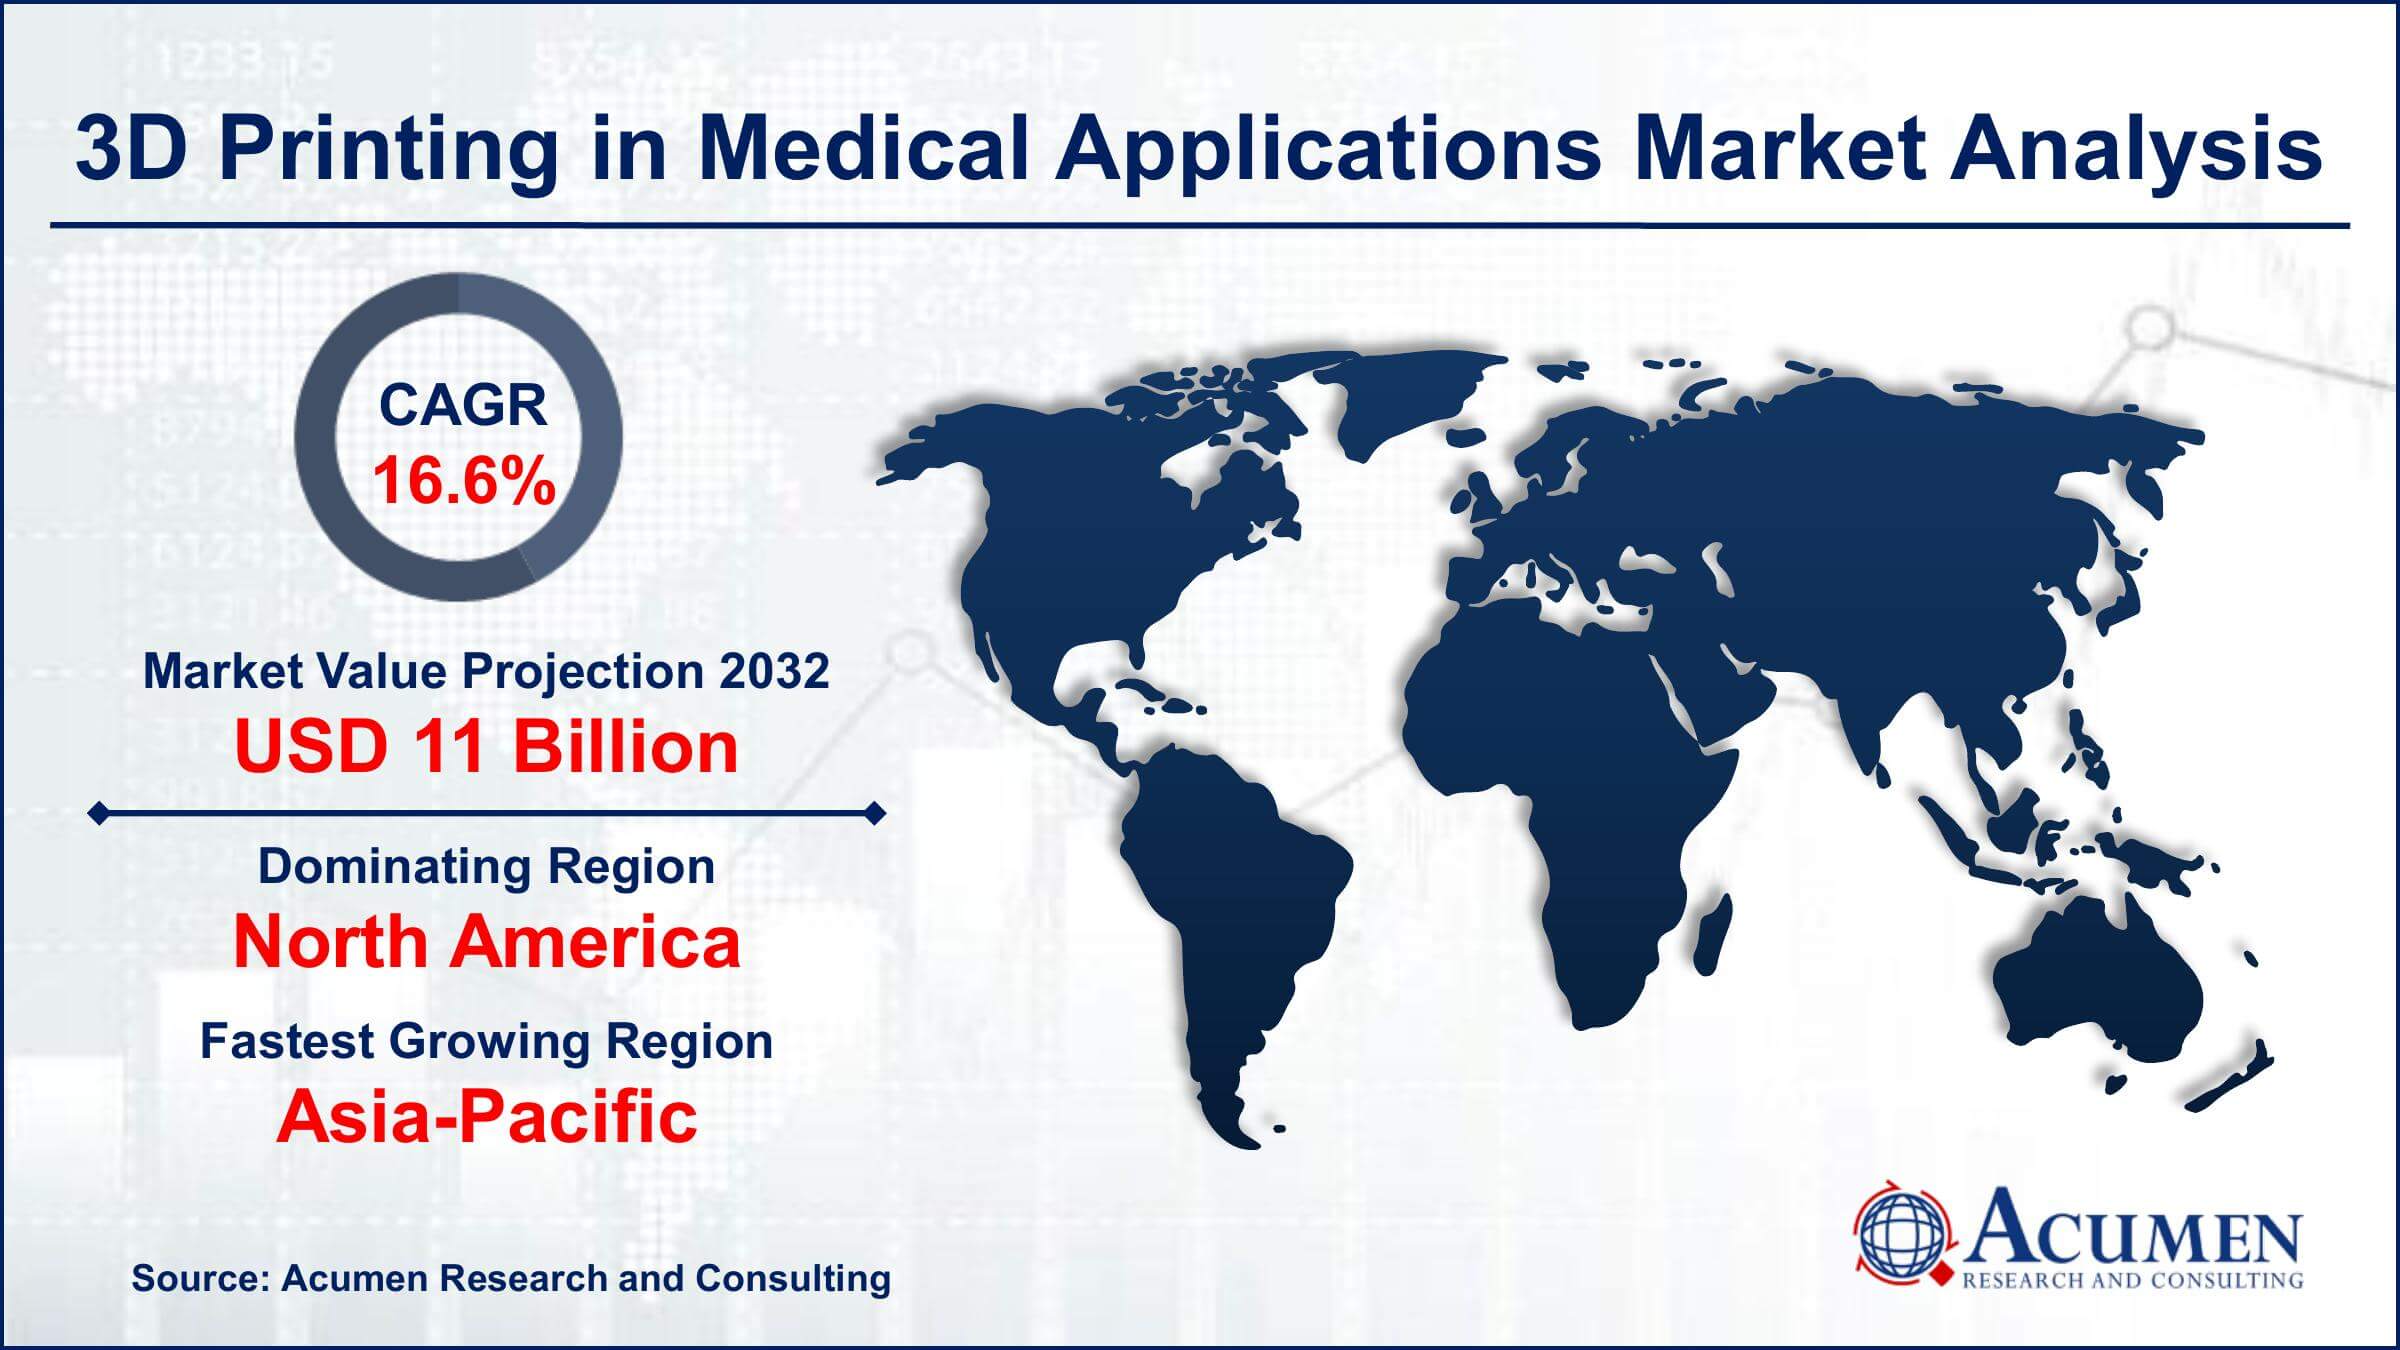 Global 3D Printing in Medical Applications Market Trends